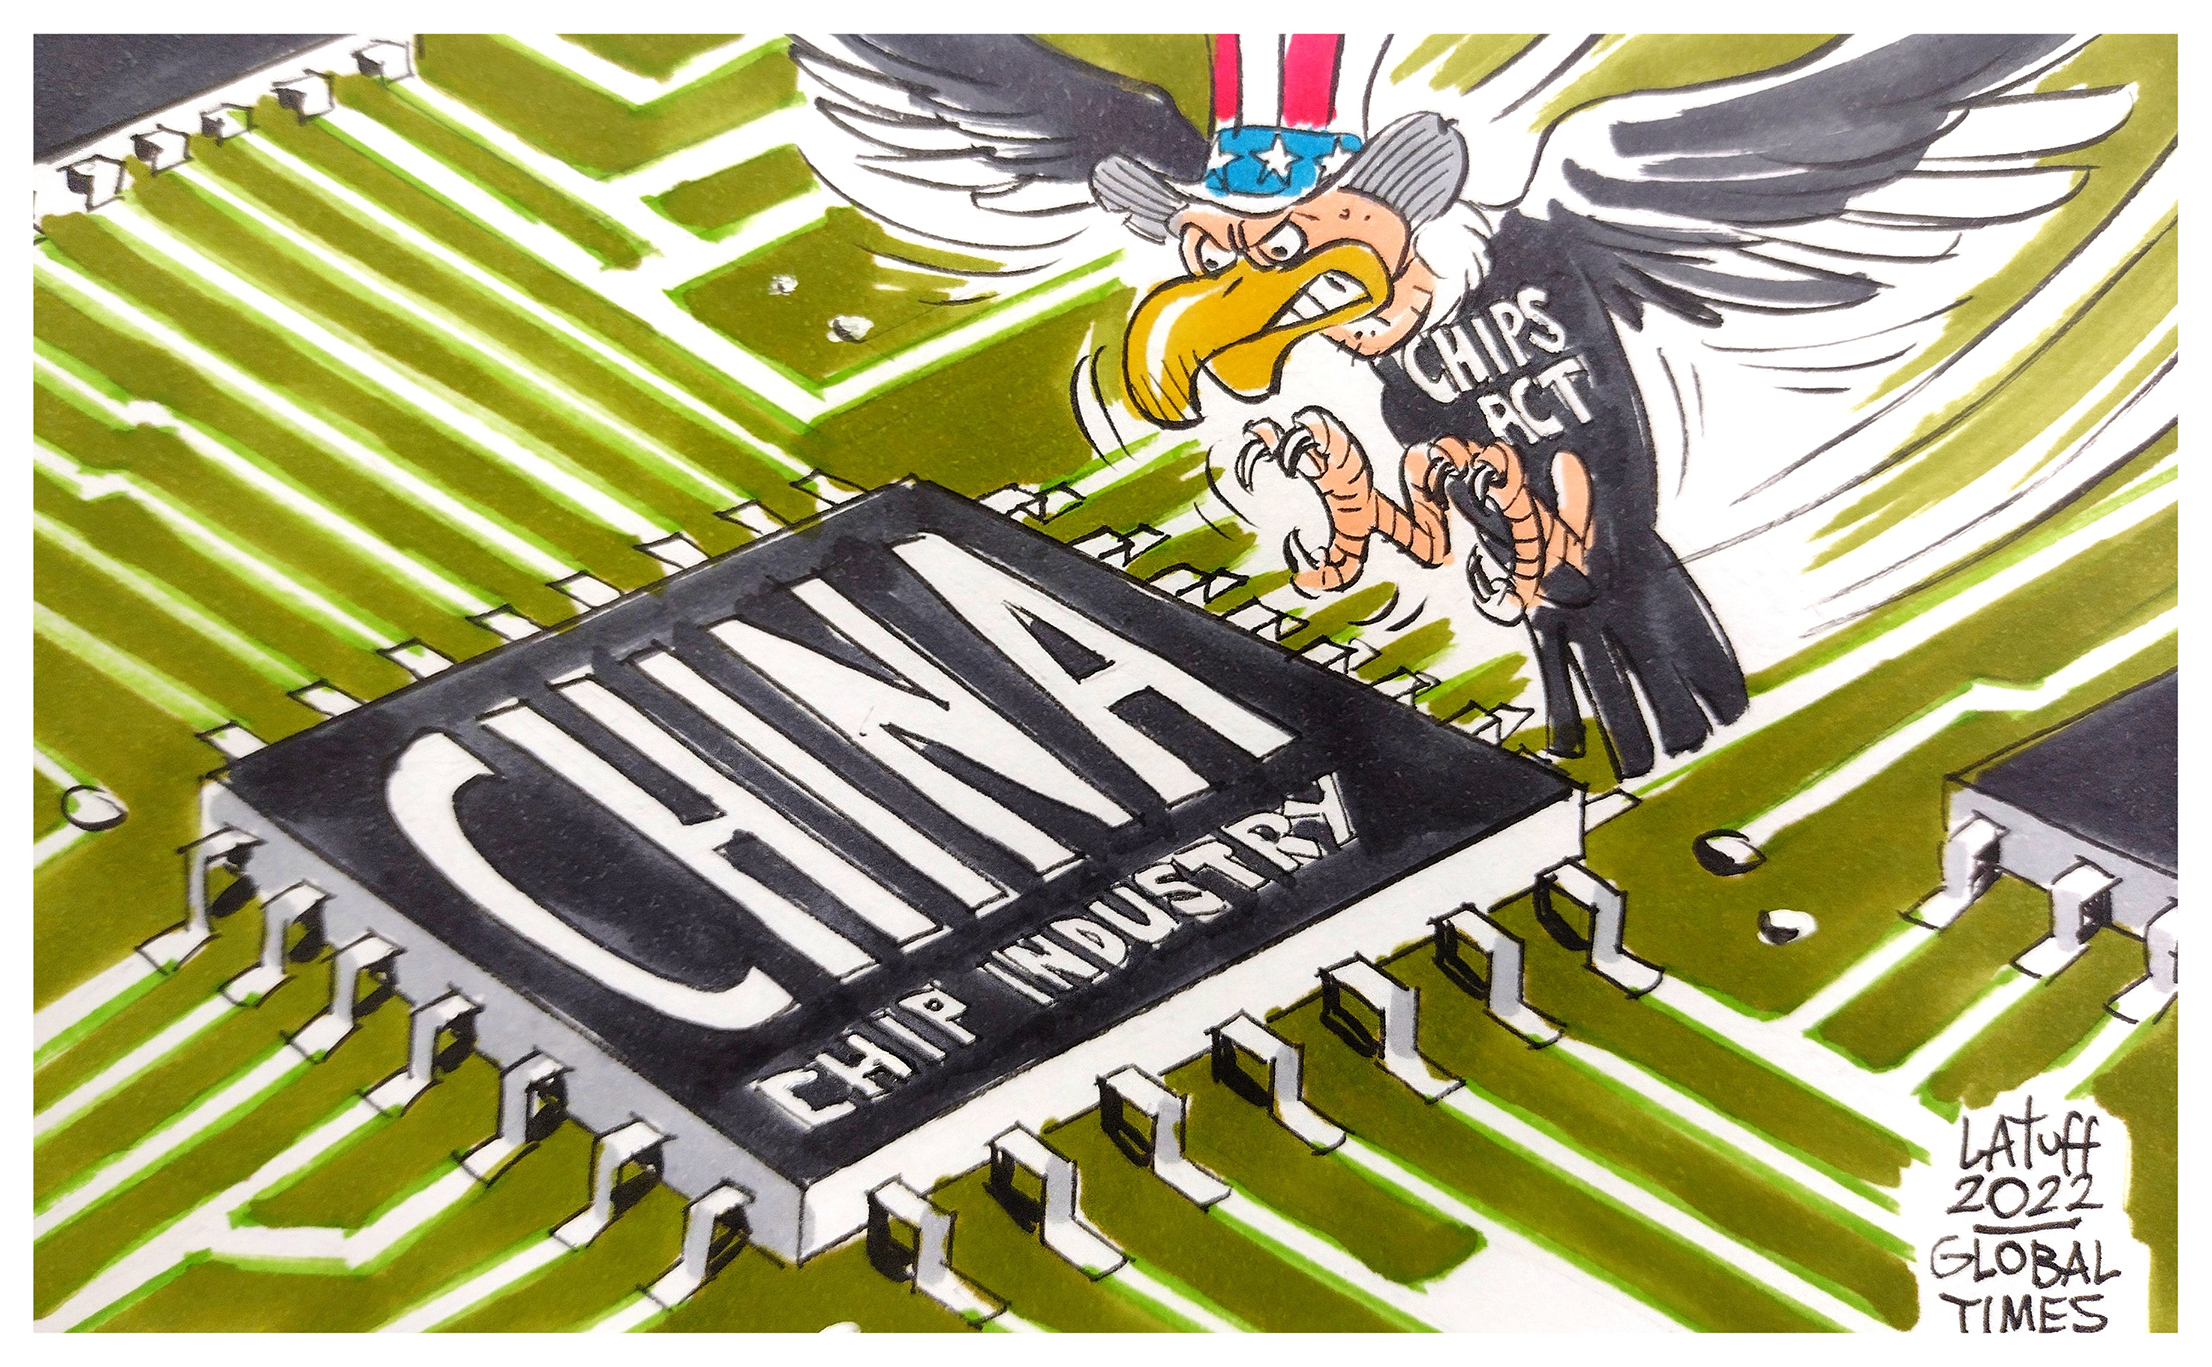 US claws at China’s chip industry fanning flames on tech confrontation. Cartoon: Carlos Latuff